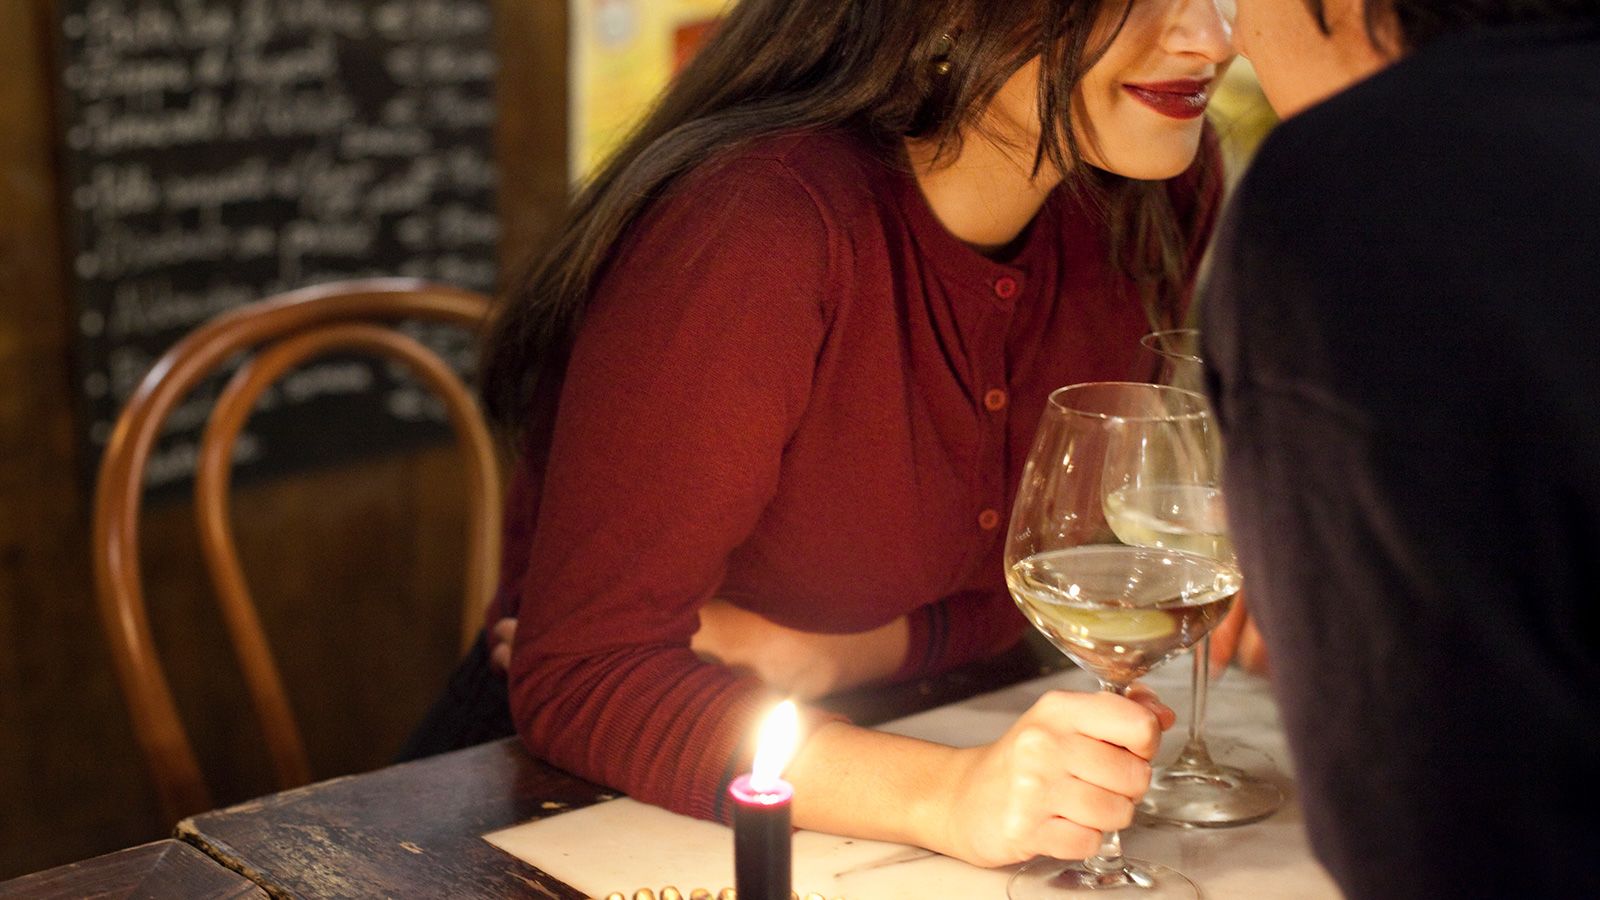 Date night makes a comeback. Here are tips for a great time